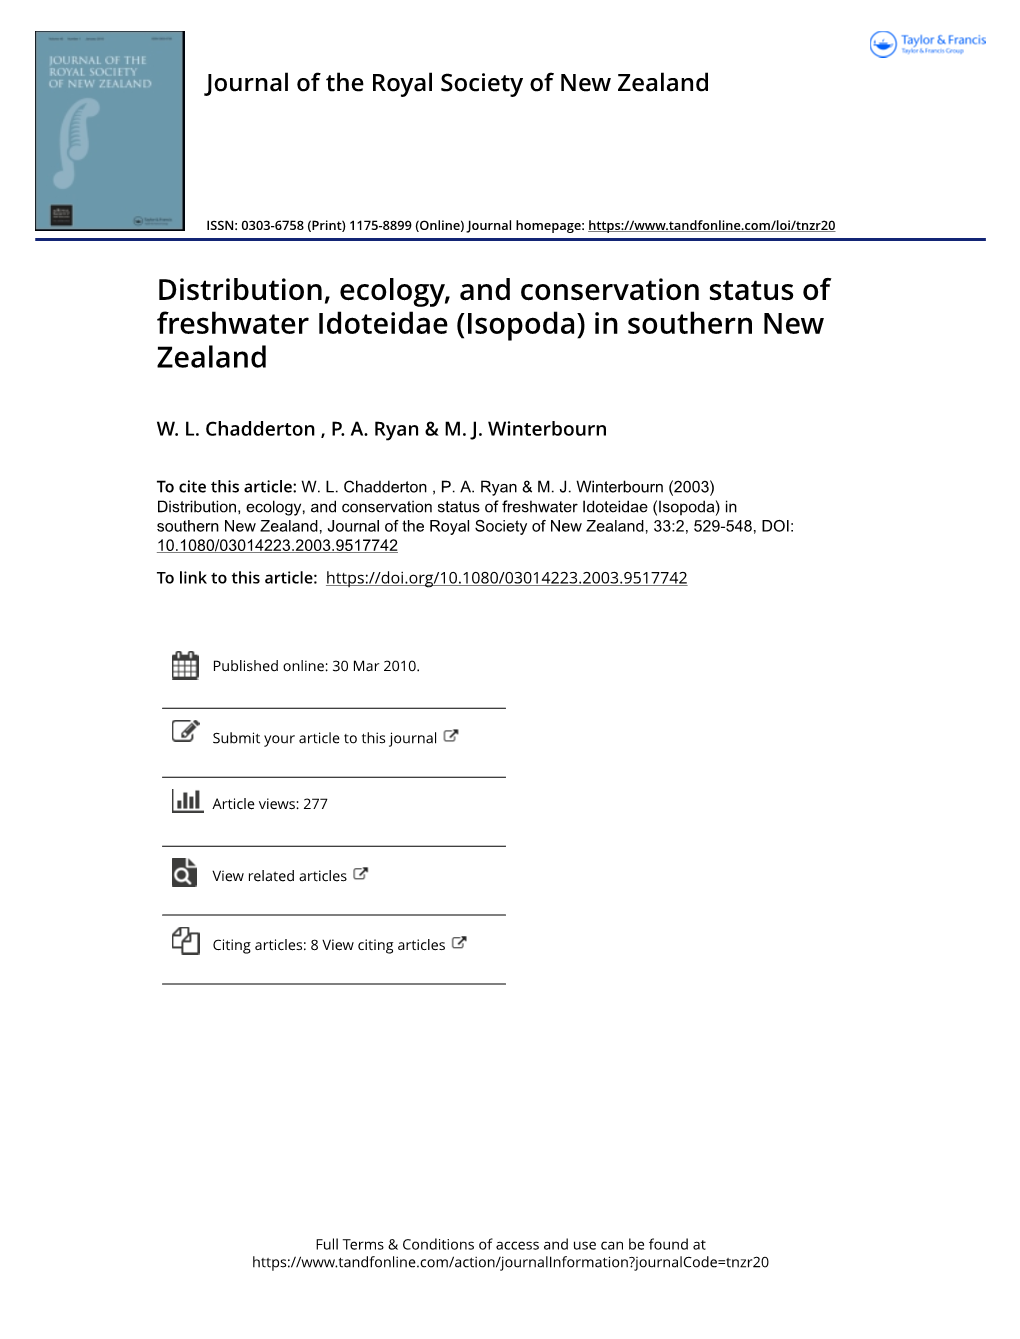 Distribution, Ecology, and Conservation Status of Freshwater Idoteidae (Isopoda) in Southern New Zealand